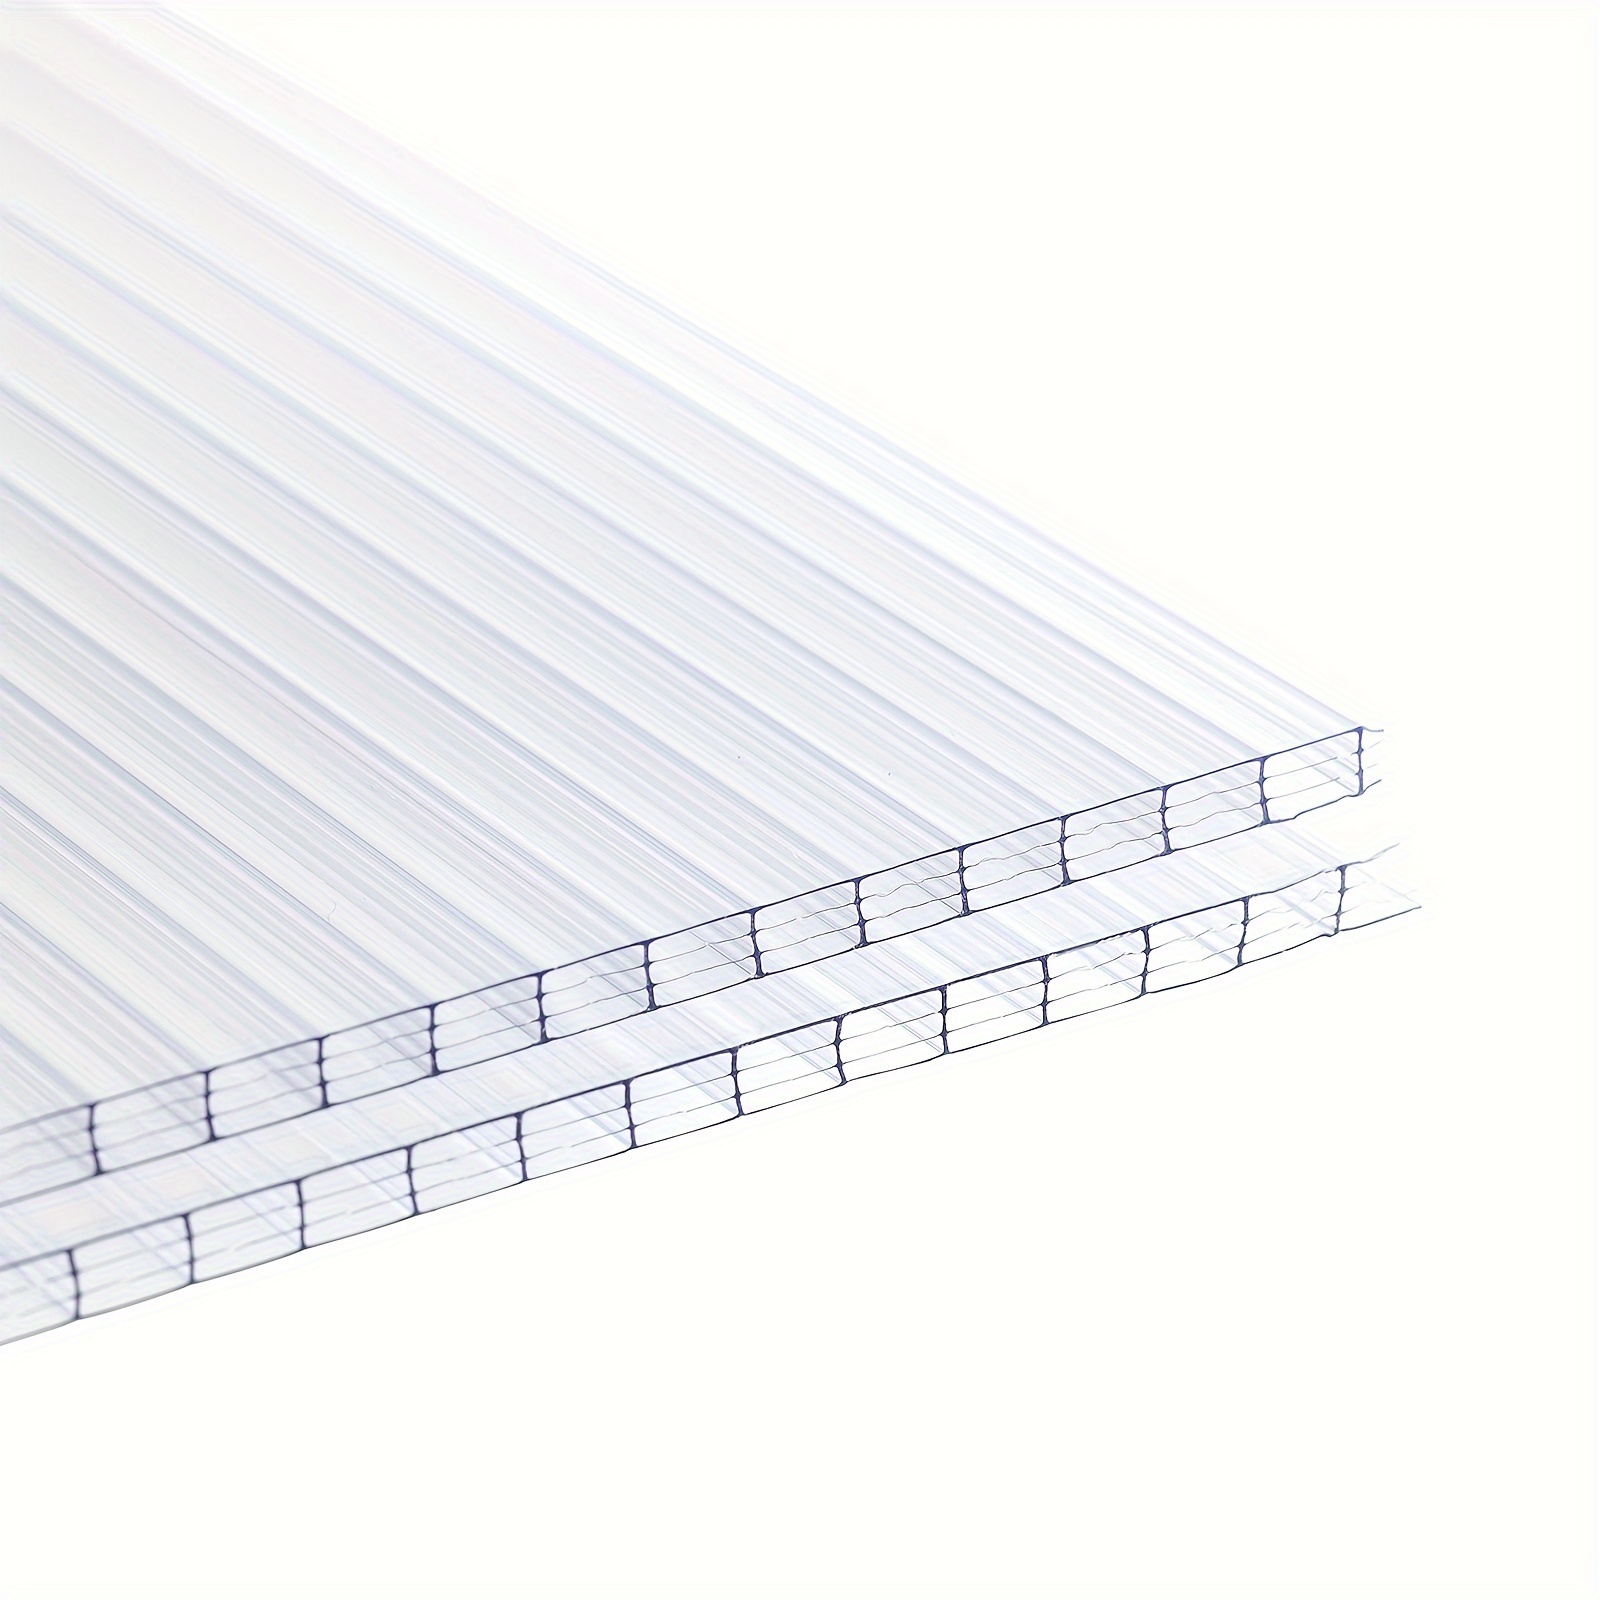 

6pcs Polycarbonate Greenhouse Panels, Waterproof Uv Protected Reinforced Sheets - 24'' X 48'' X 0.4''